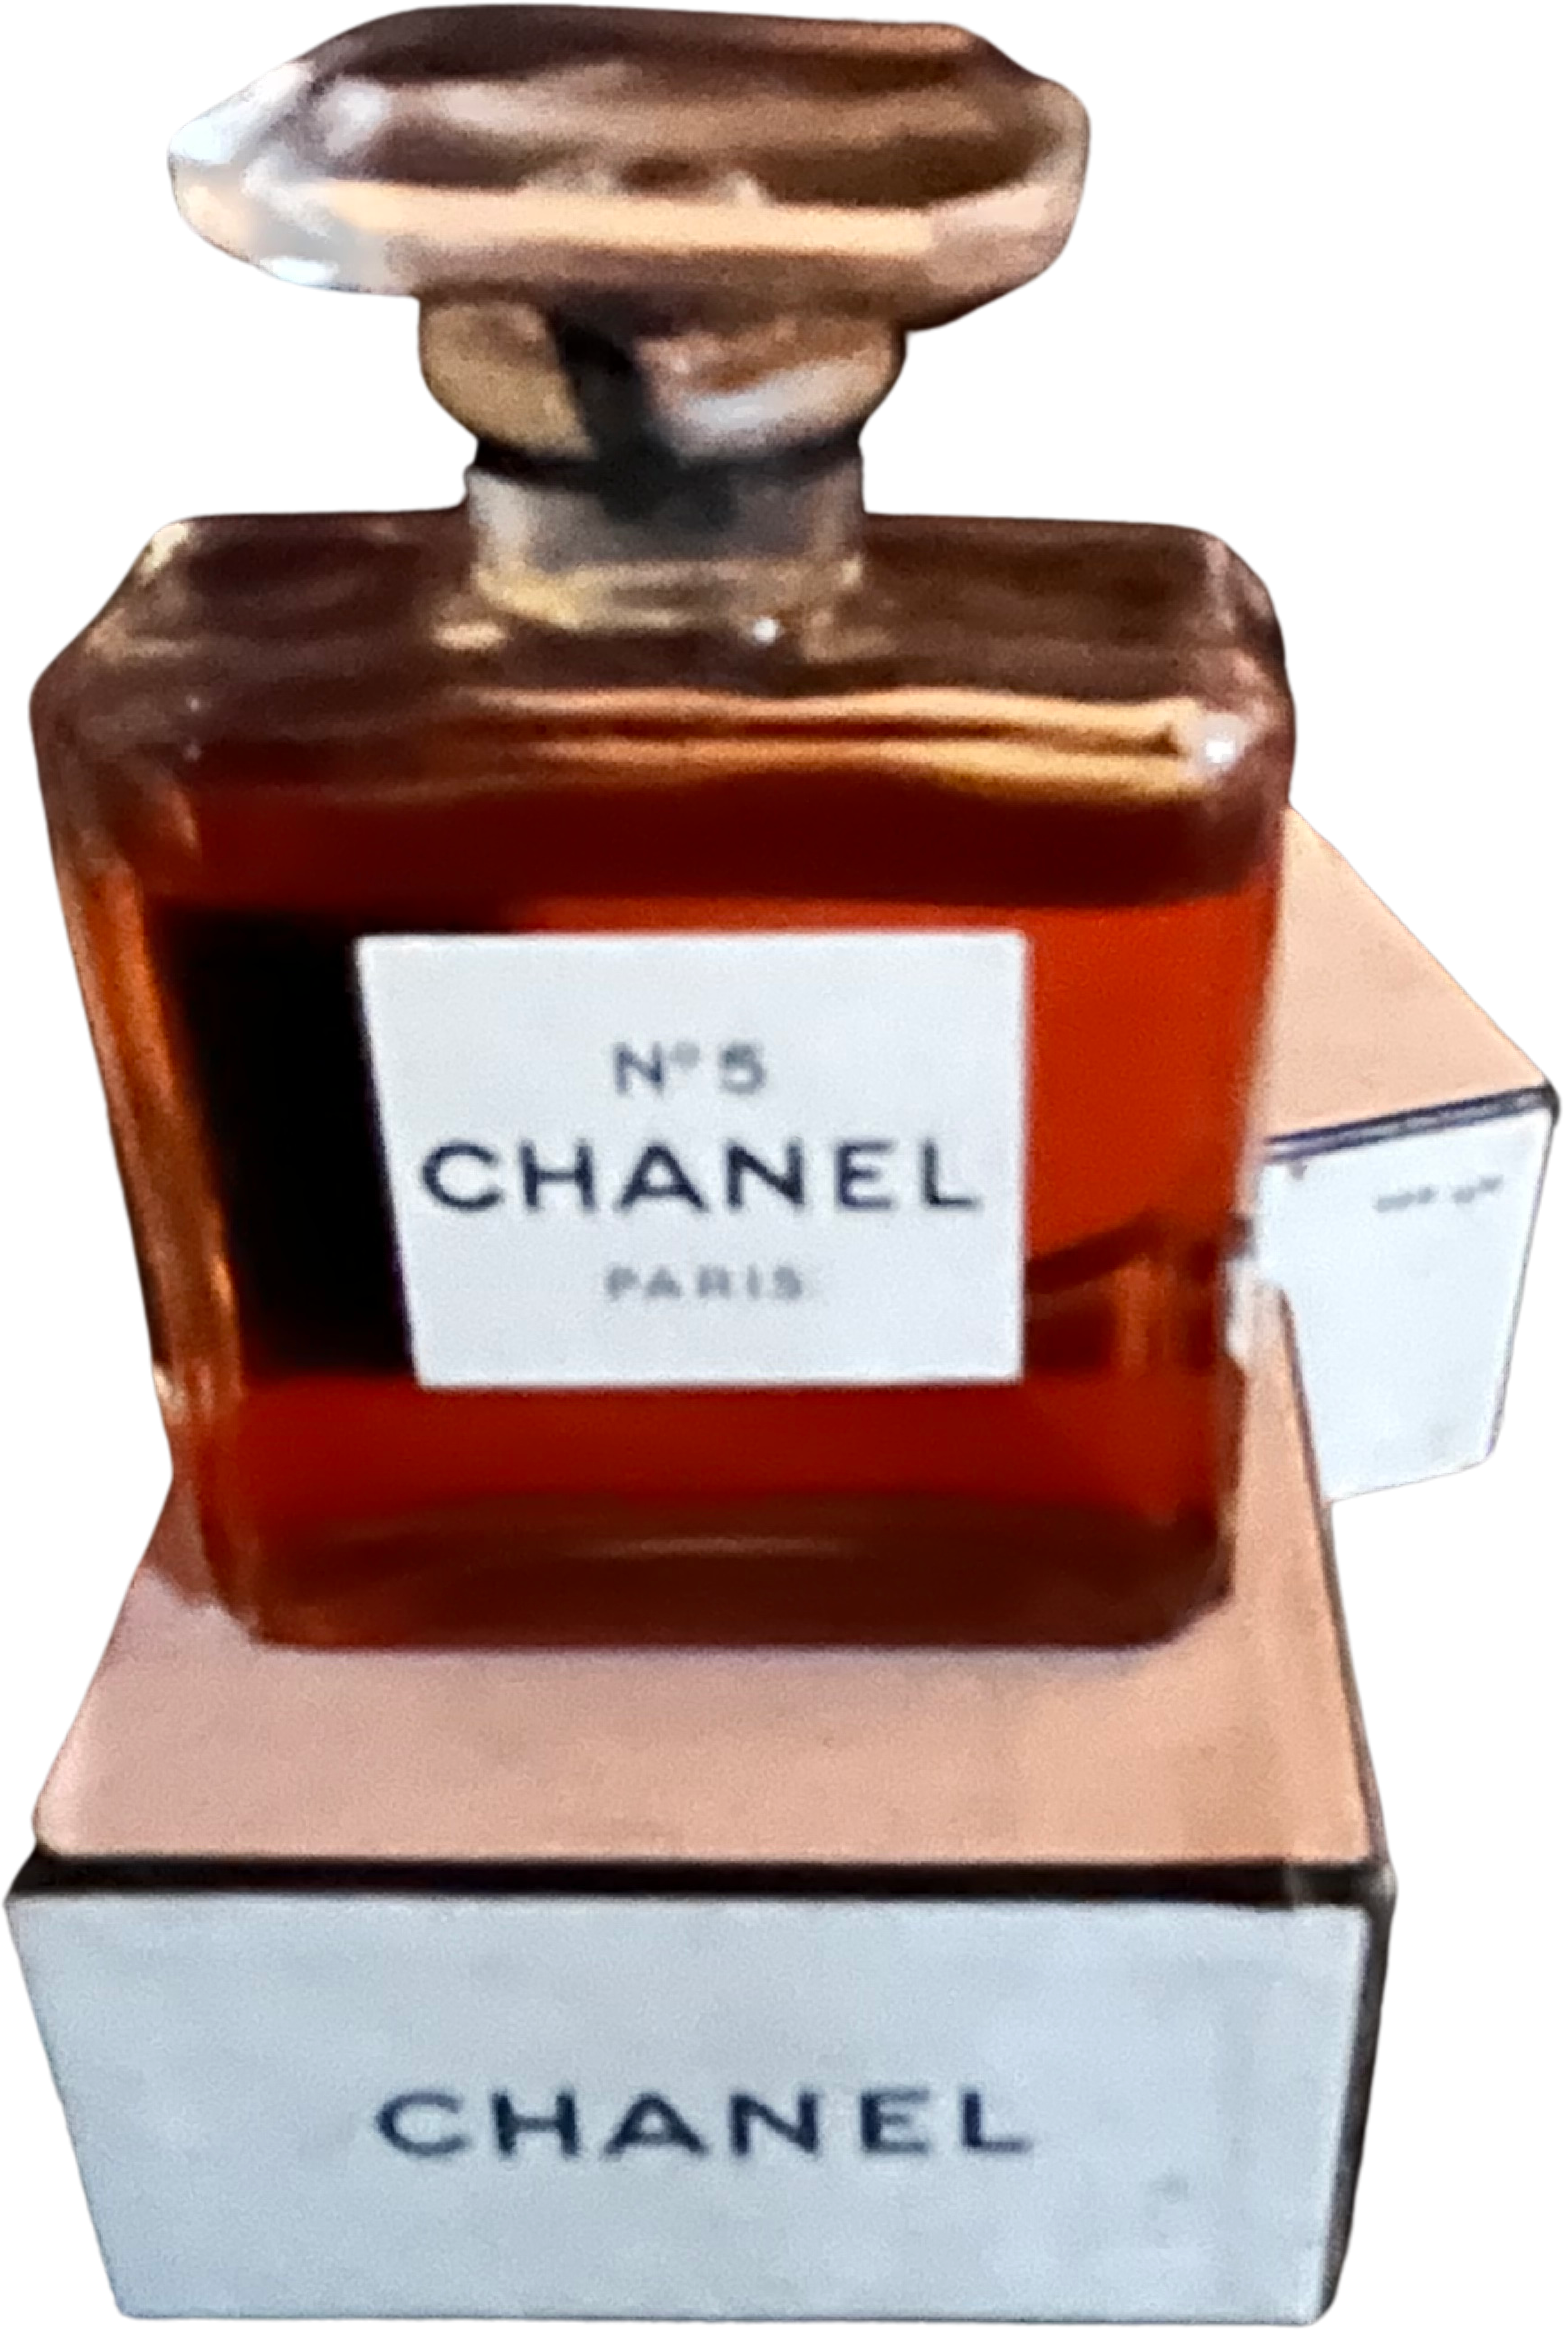 Chanel No 5 French Perfume Parfum Bottle Box Isolated Dark Background  Editorial Photo - Image of expensive, black: 93975536